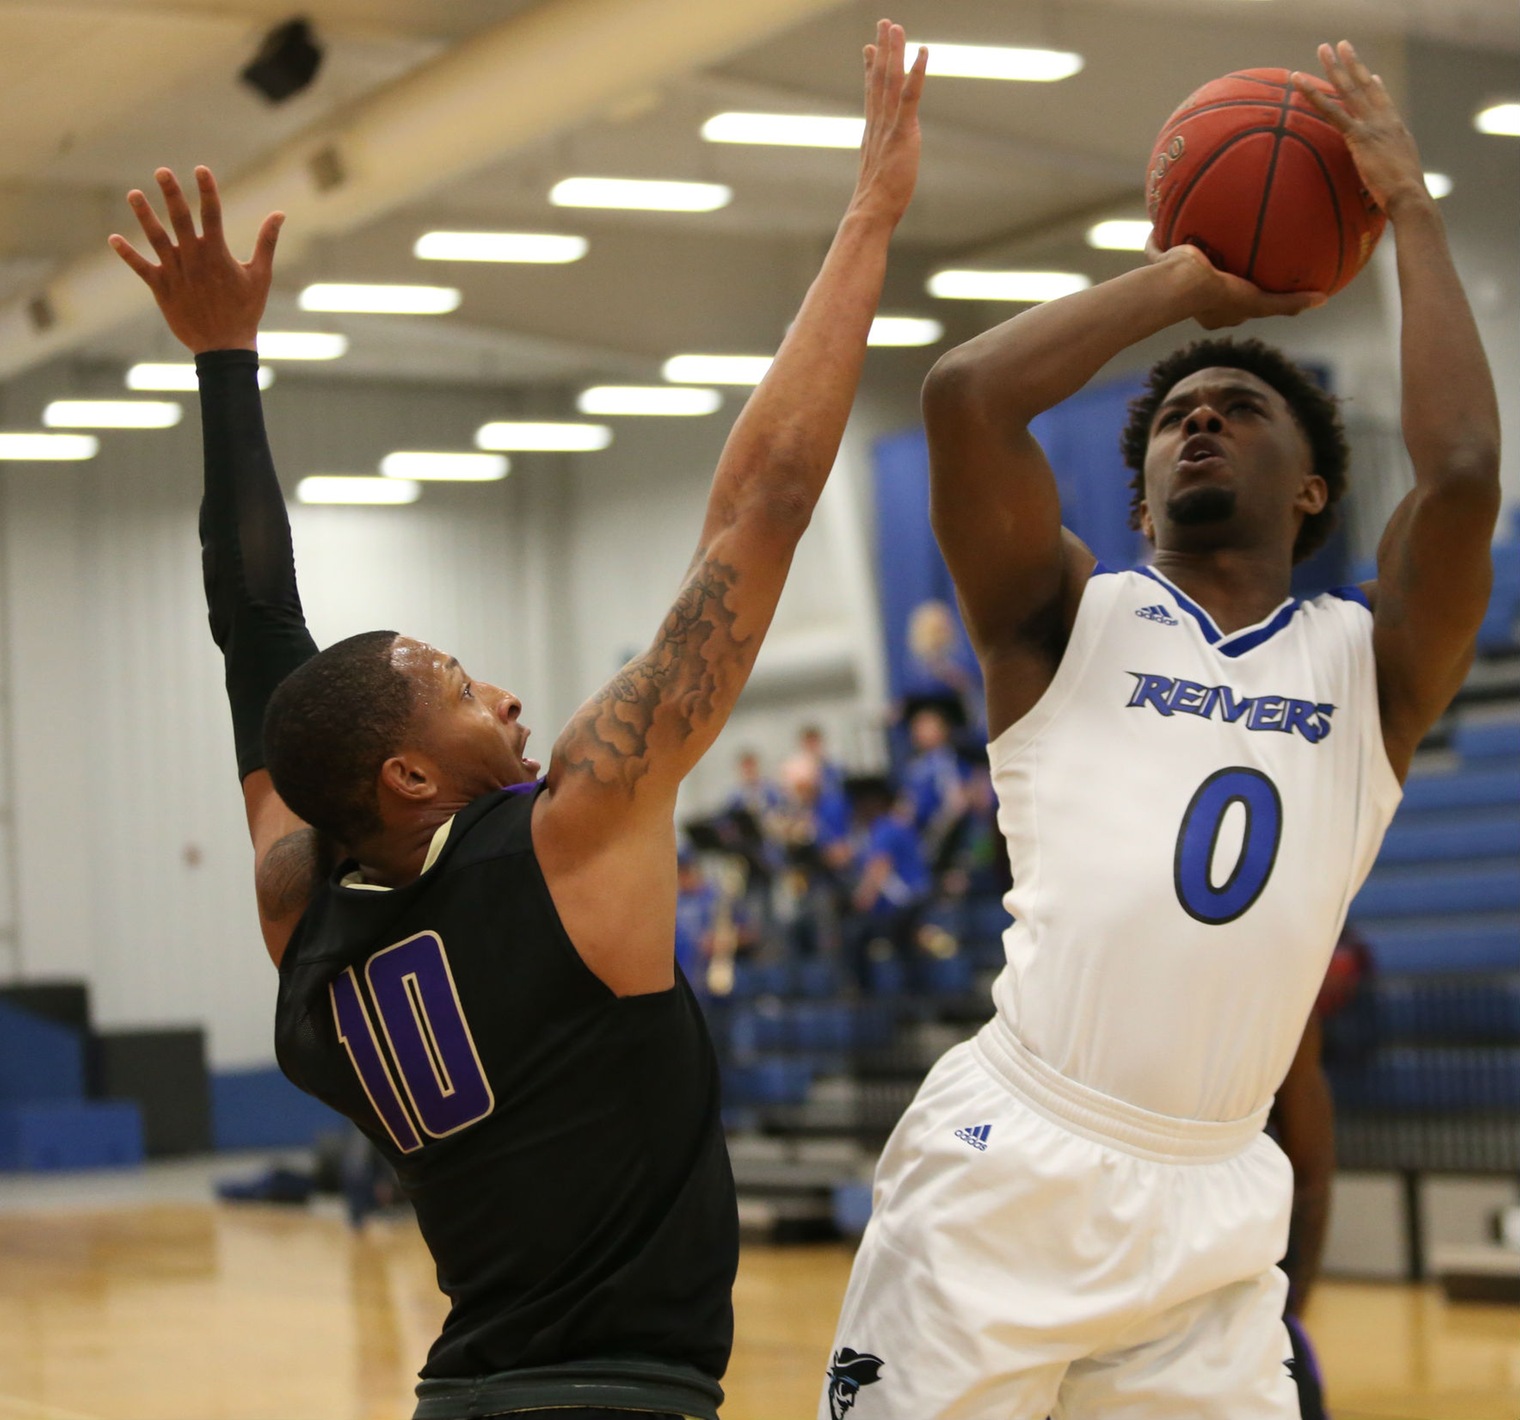 Alec Spence and his Reiver teammates once again came back from a double digit deficit to capture a 76-71 victory over Iowa Central Tuesday (11/12) evening at Reiver Arena.